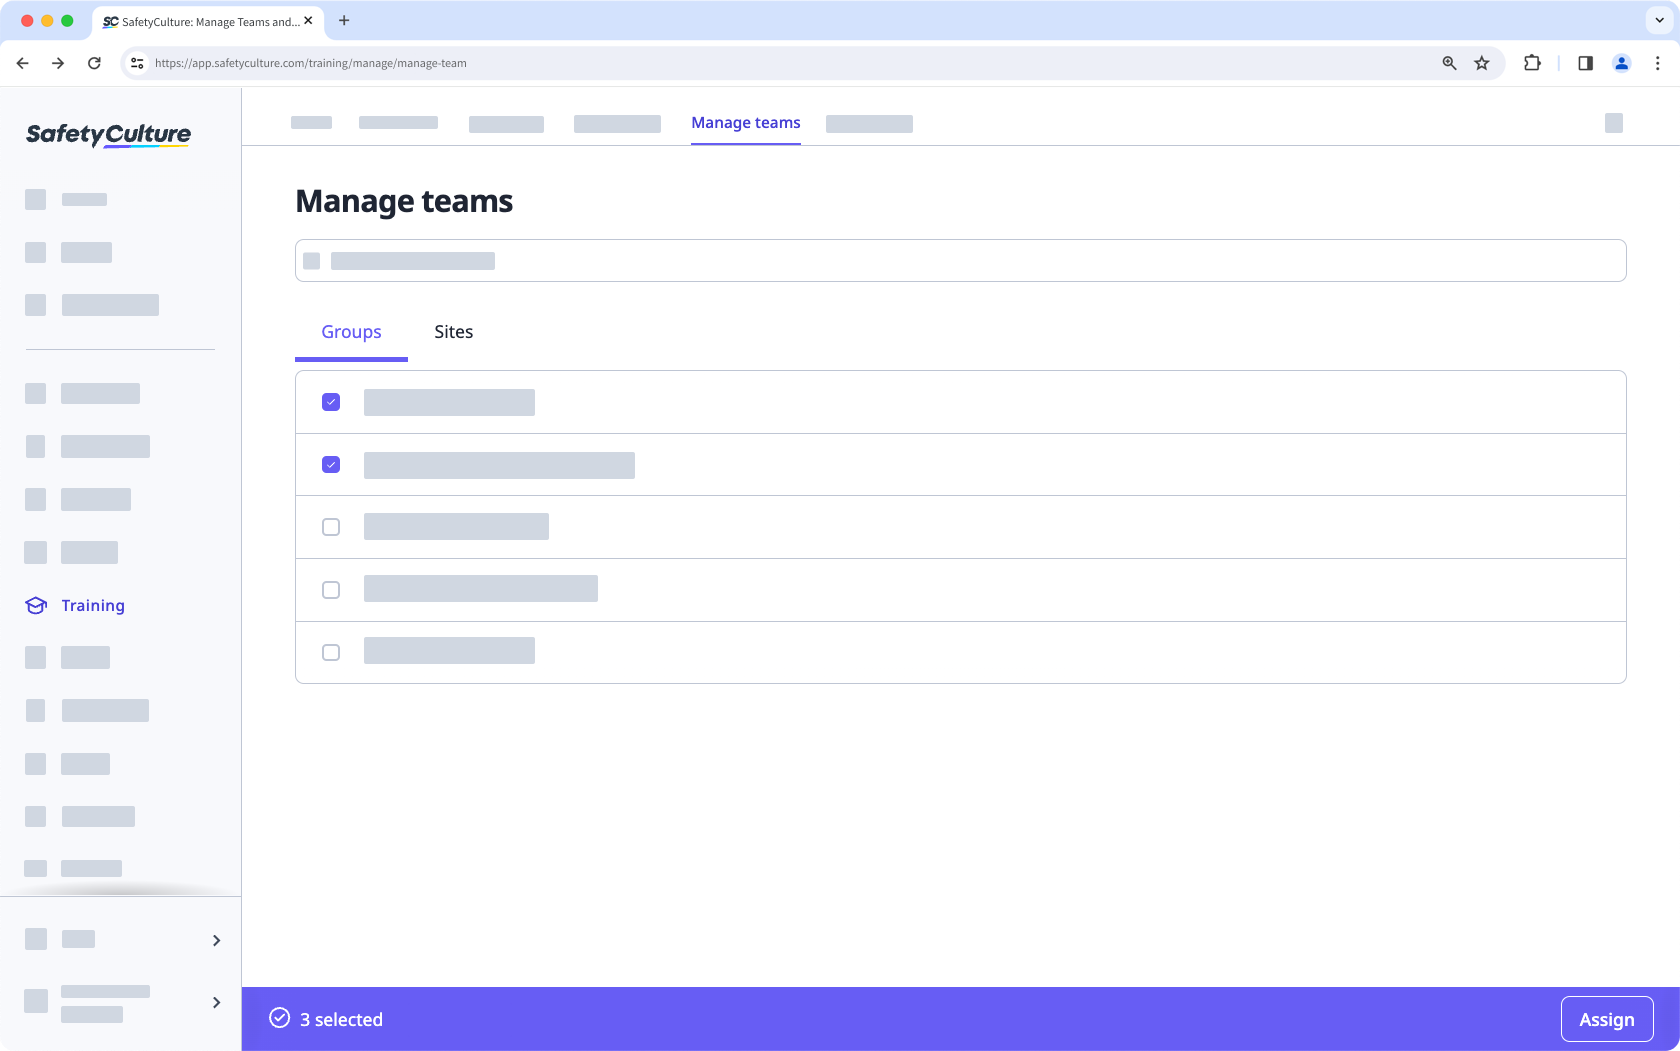 Bulk assign team managers to groups and sites via the web app.